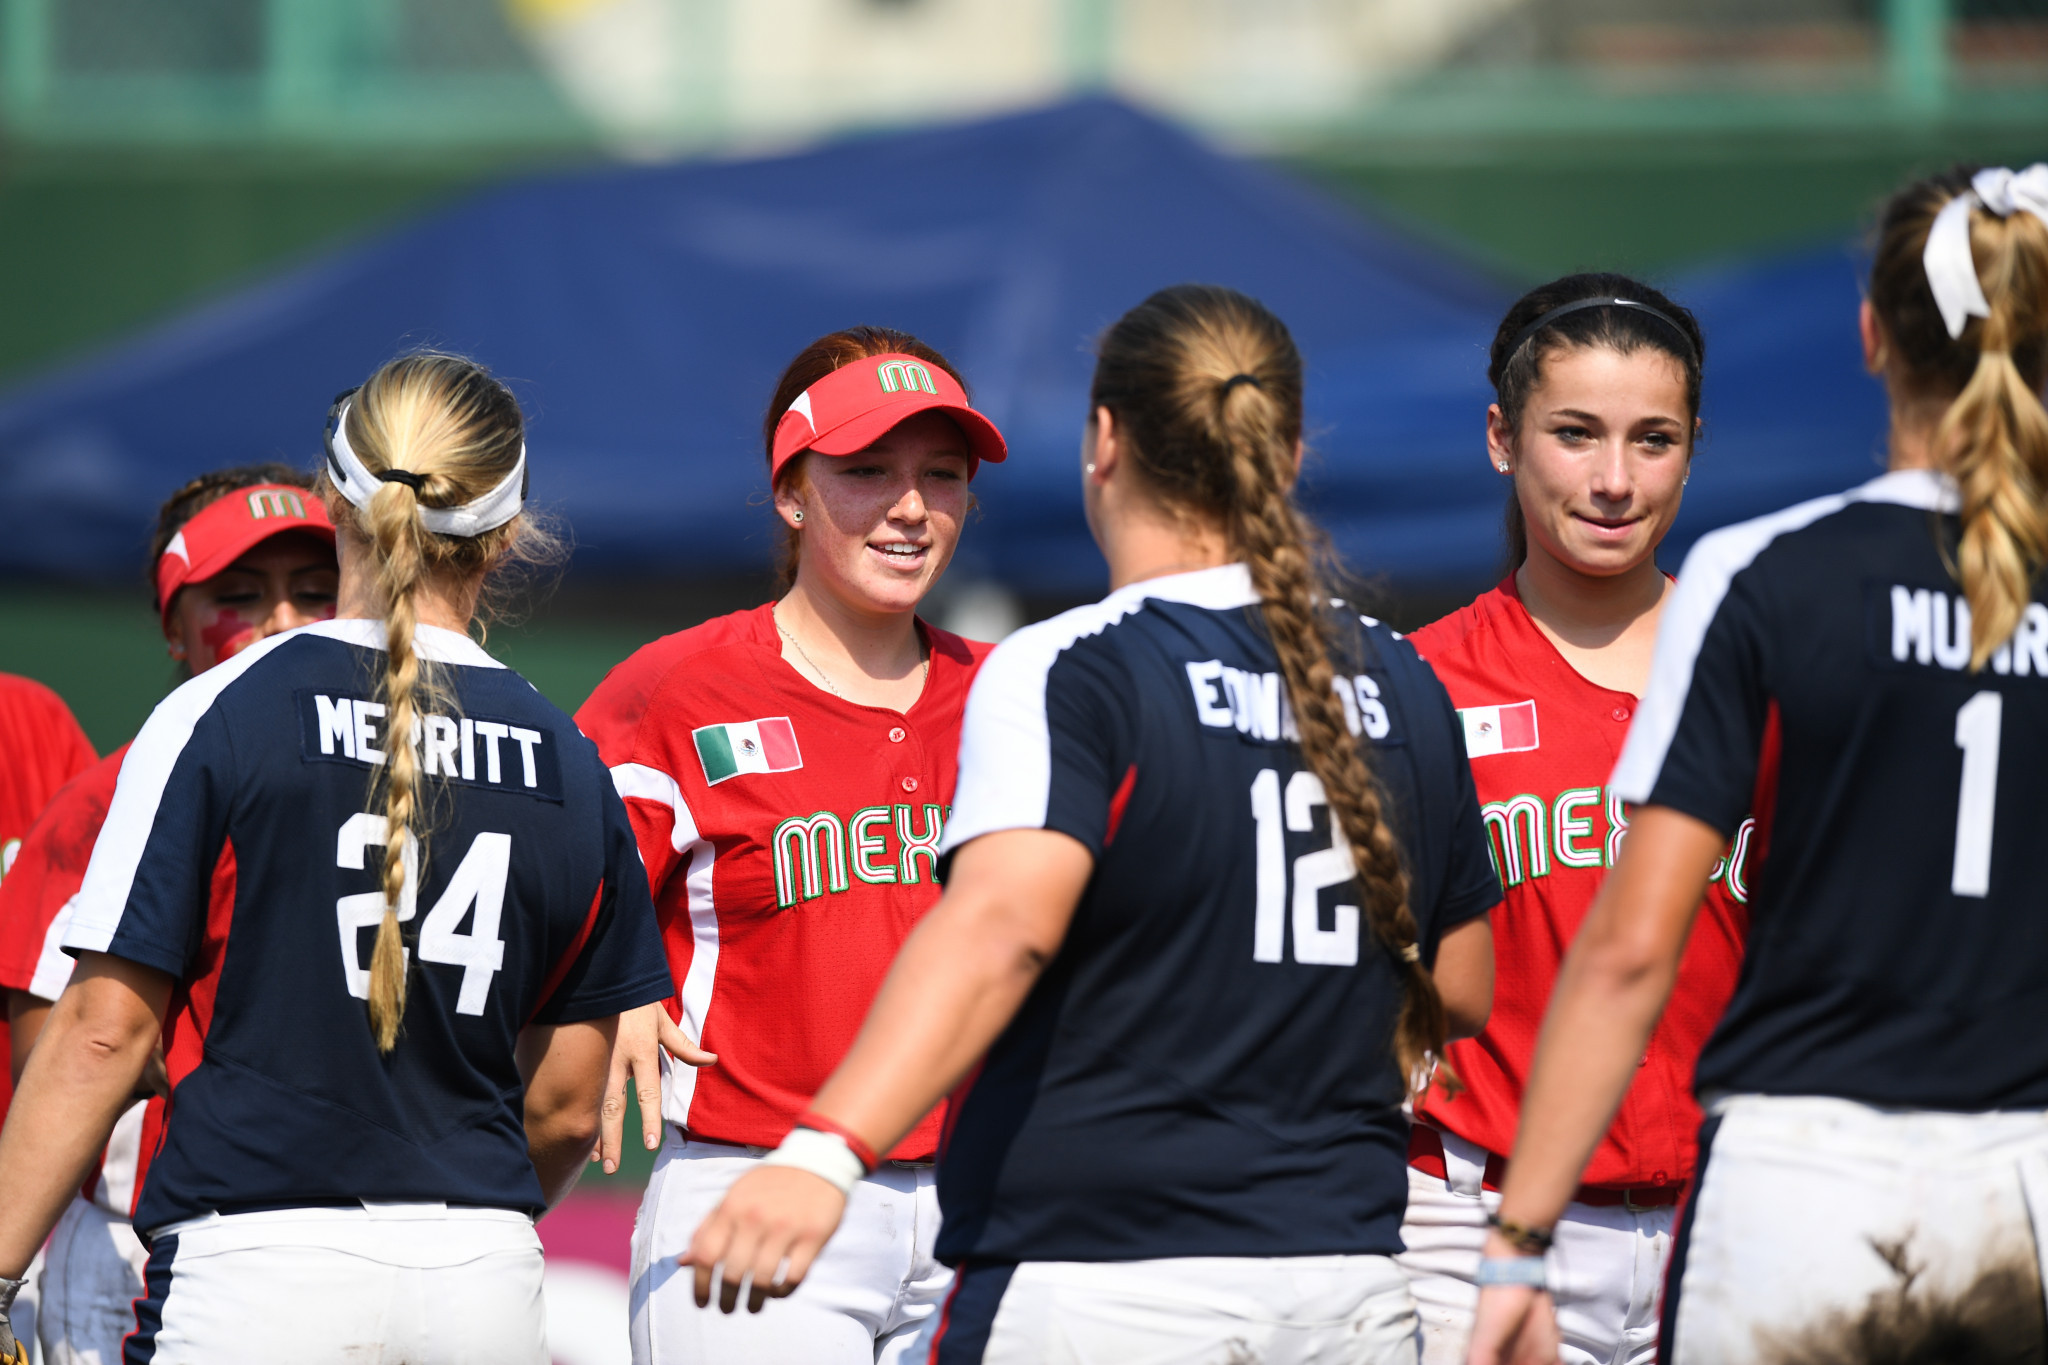 Inclement weather prevents United States and Mexico playing three-game softball series